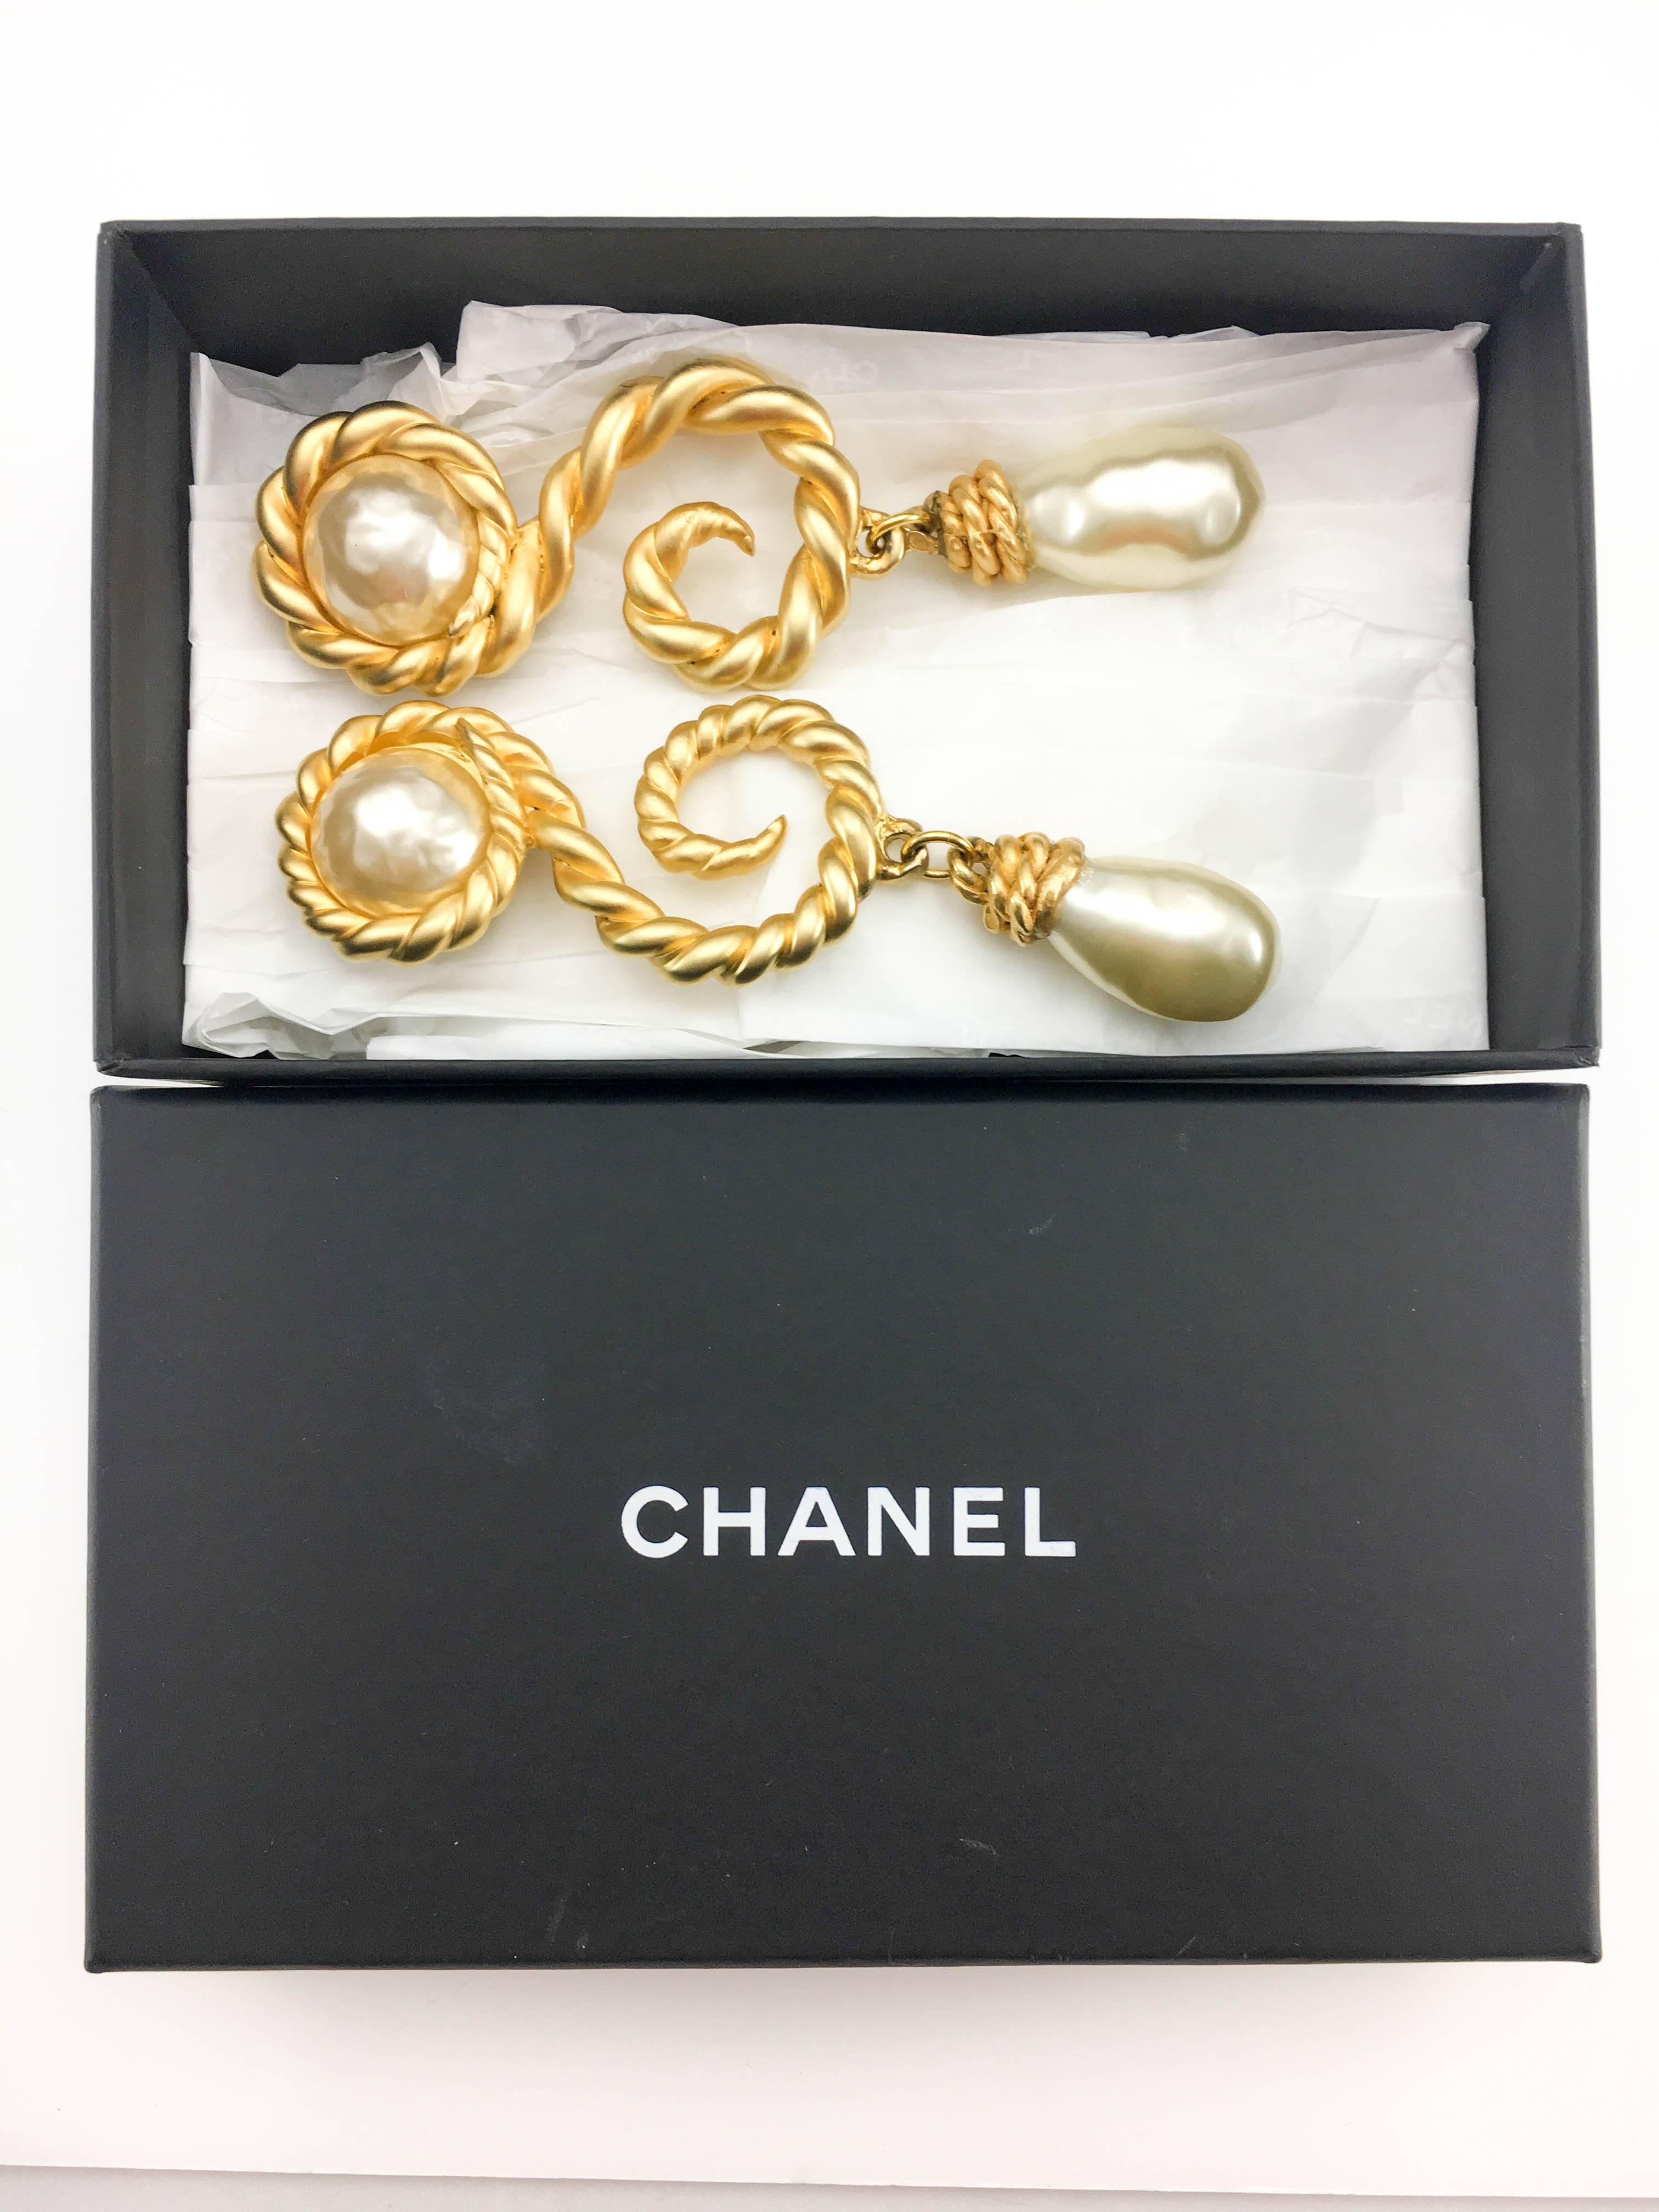 Chanel 1990 Runway Look Massive Arabesque and Baroque Pearl Earrings 8